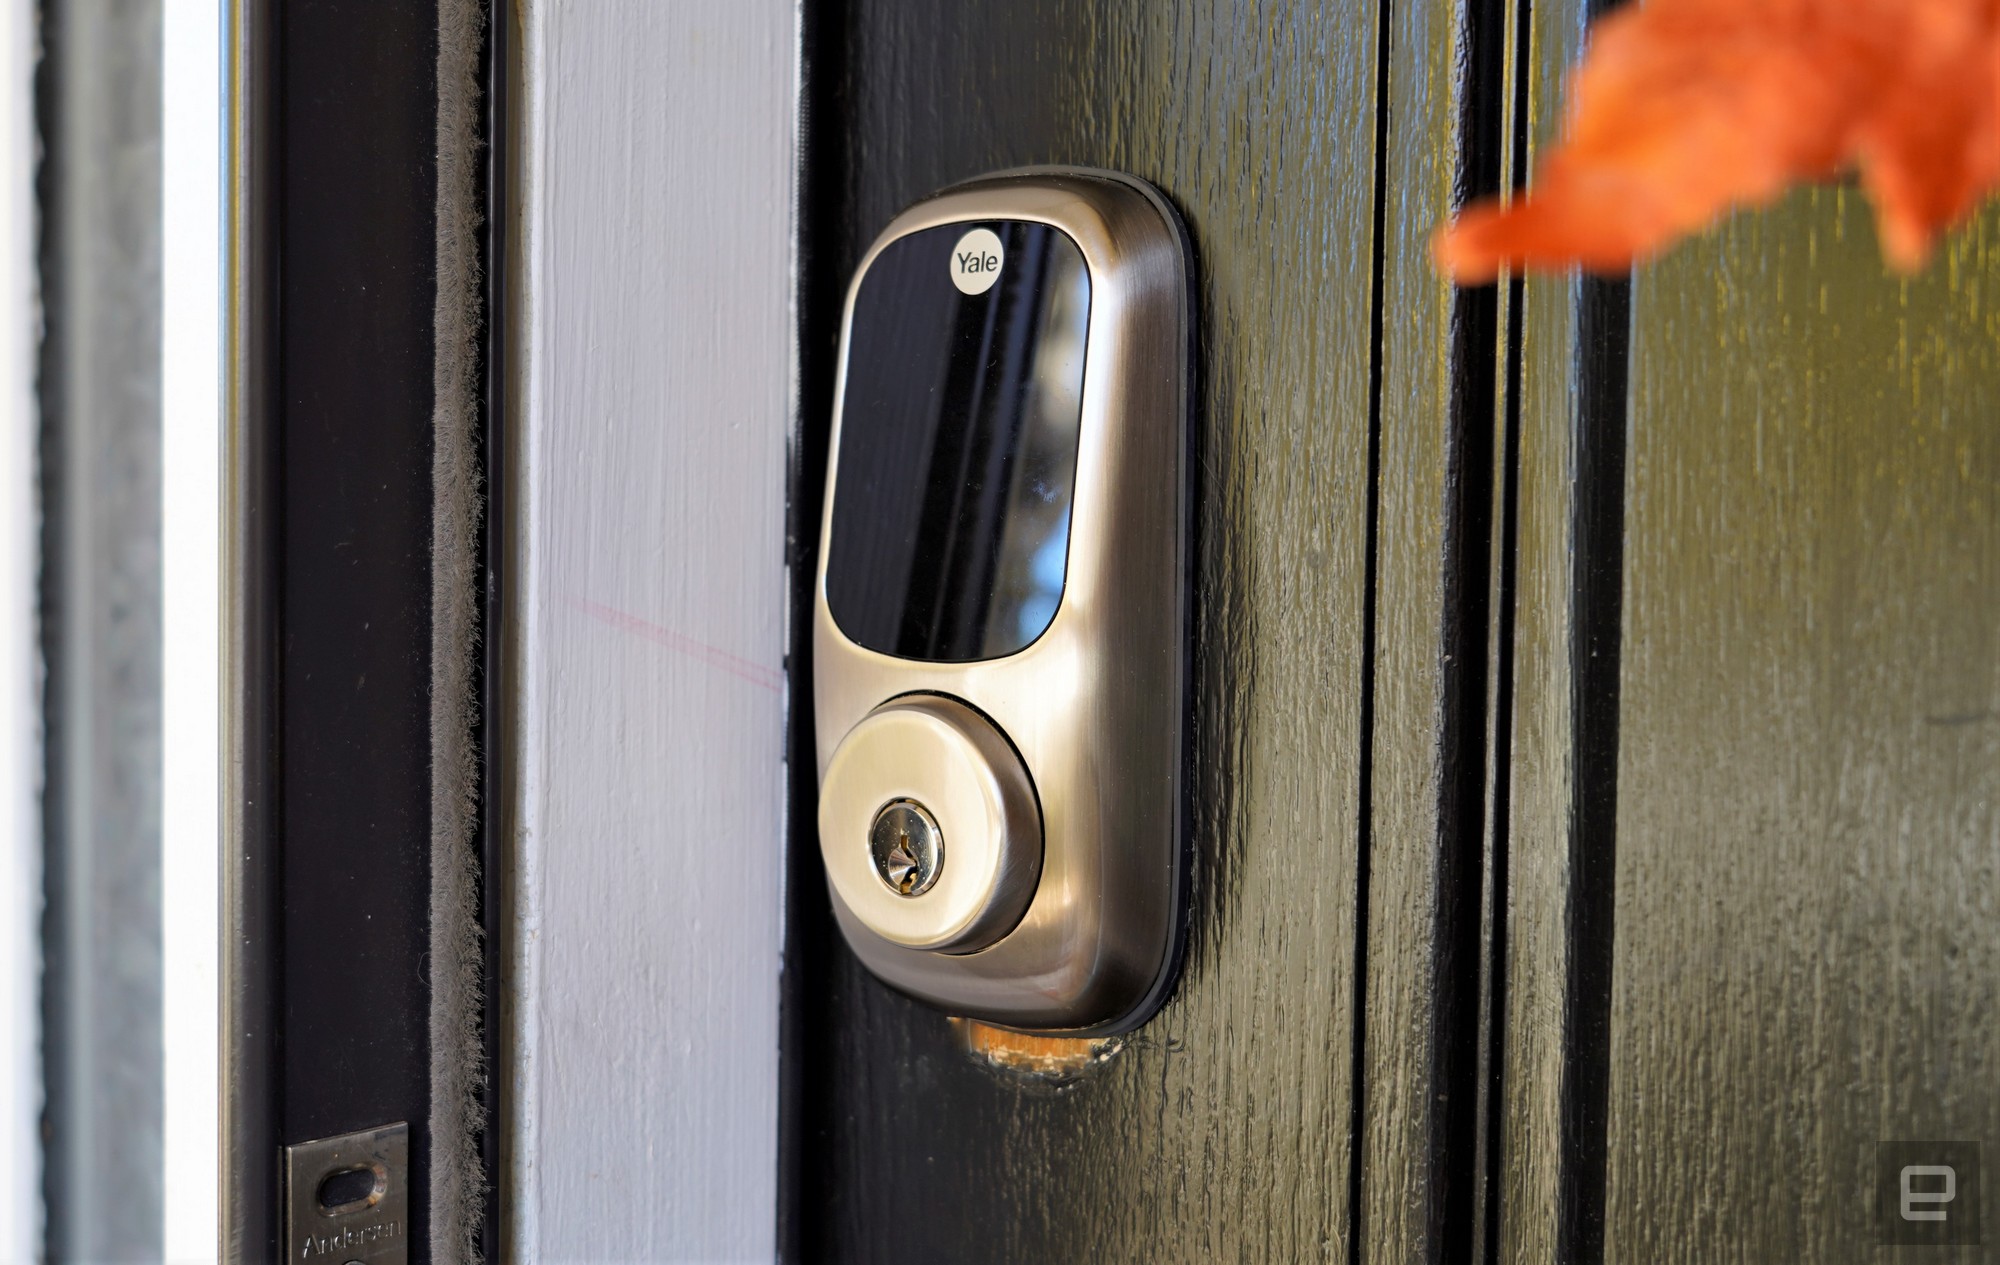 Yale's Assure smart lock set me free from key anxiety